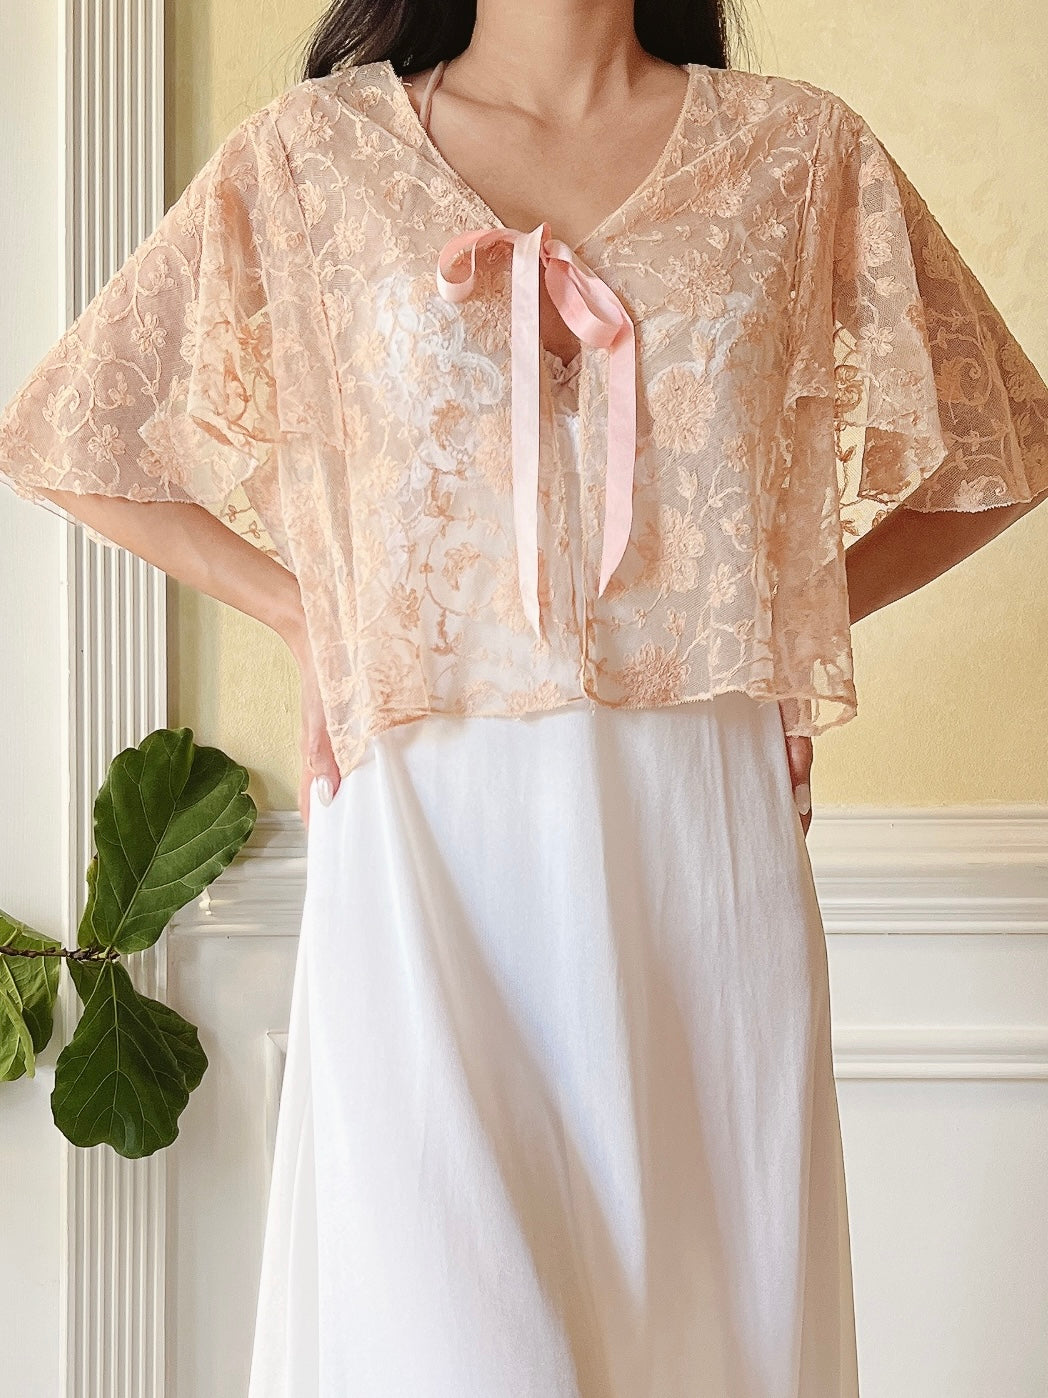 1930s Peach Lace Bed Jacket - S/M